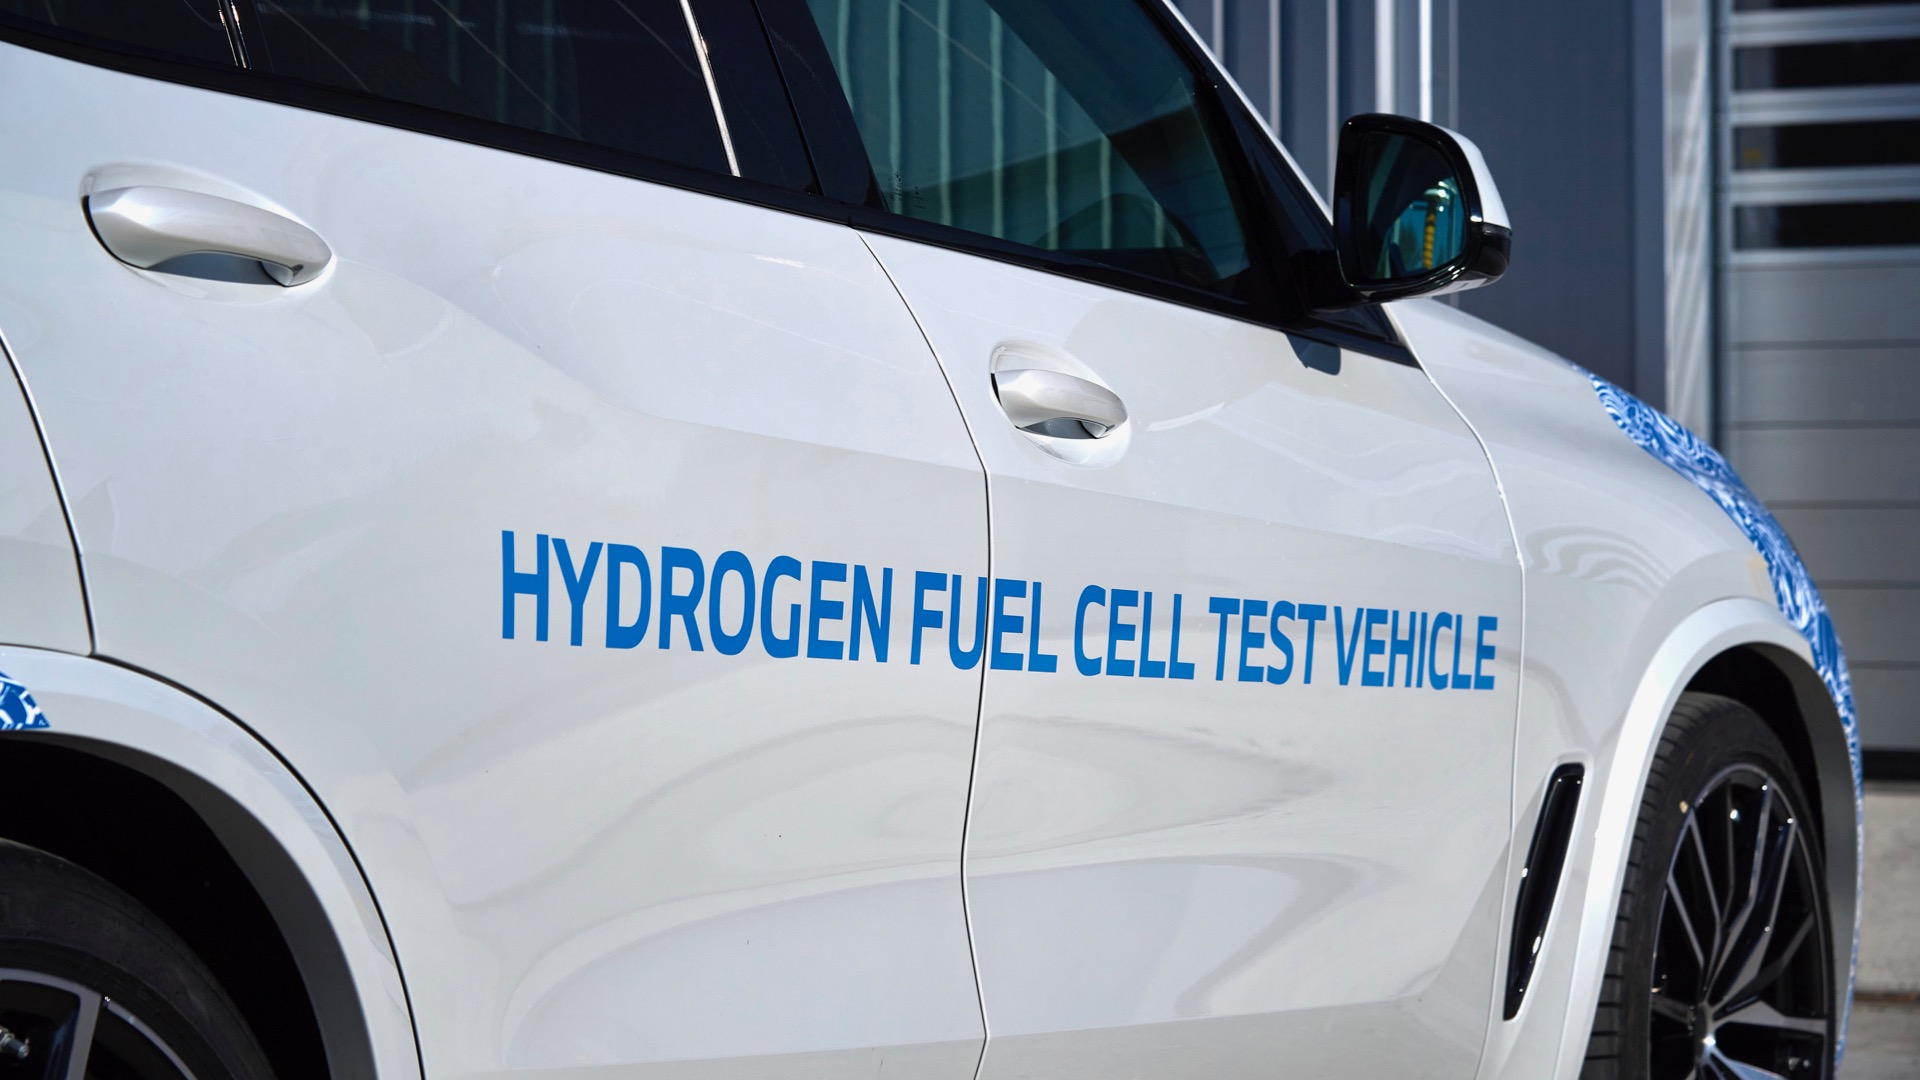 DOE hydrogen hubs might be as dirty as coal if clean hydrogen isn't defined, experts caution